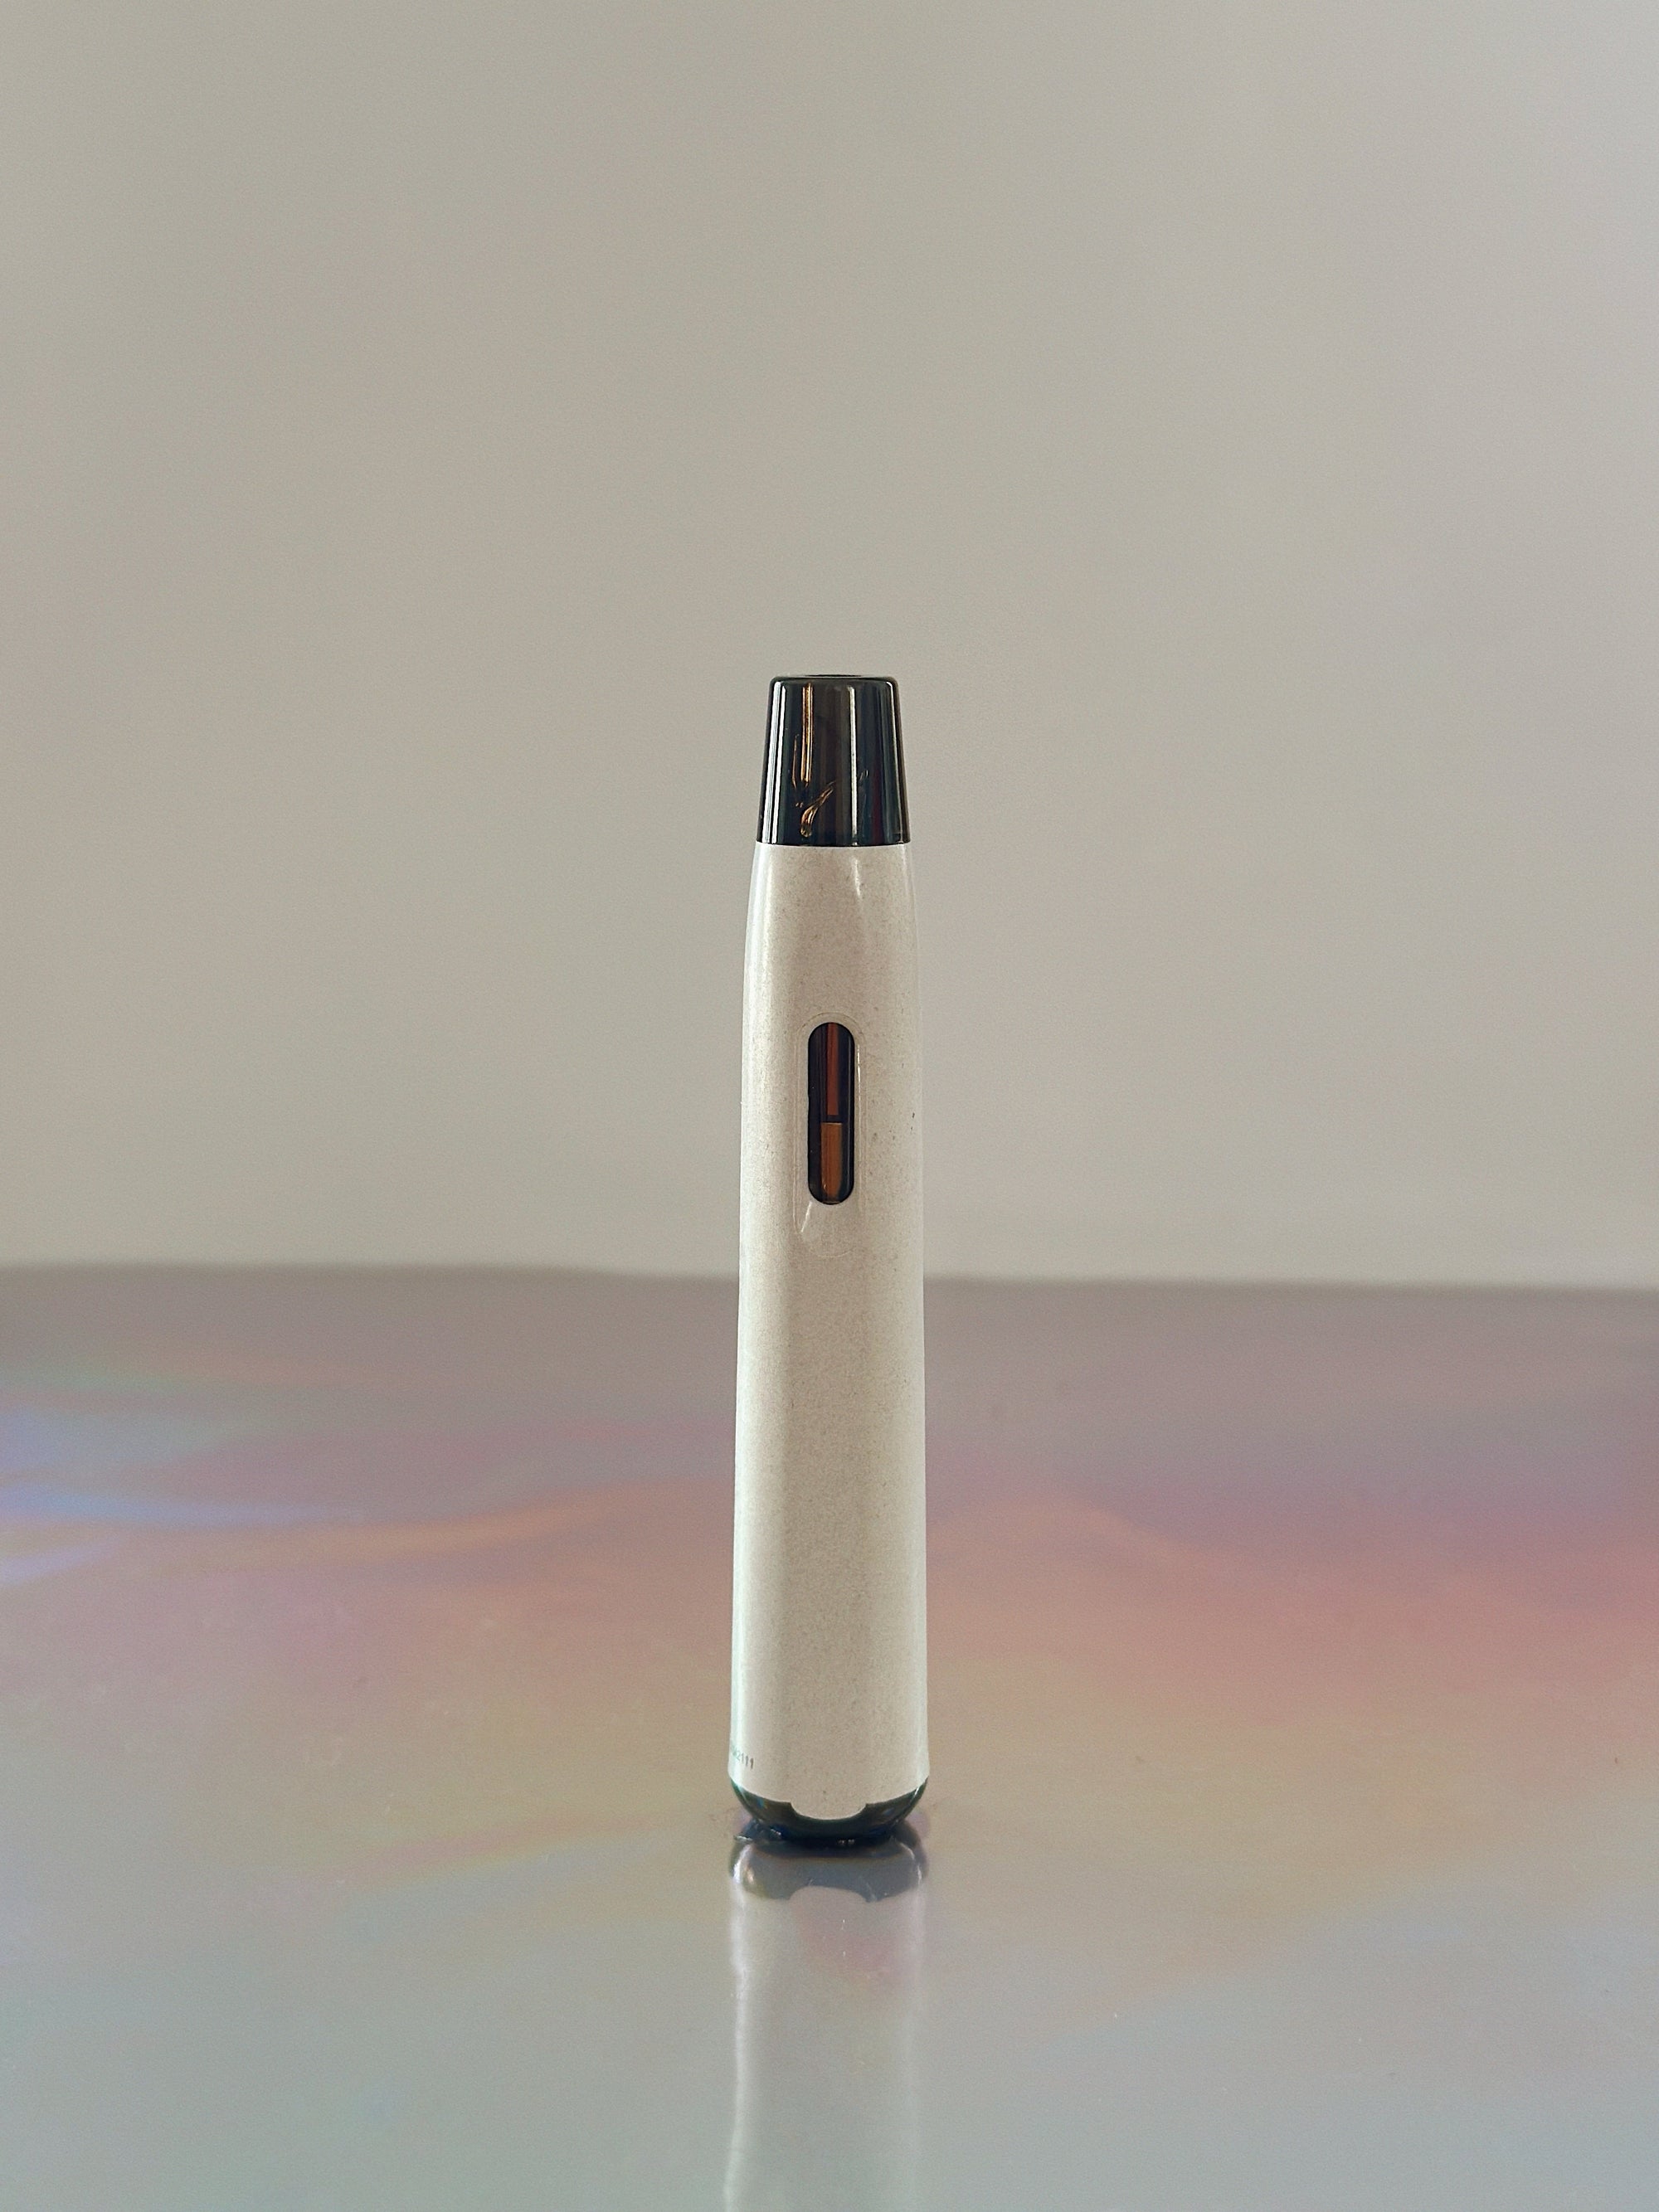 Blue Lotus Vape Pen is a white thin long vaporizer pen filled with a blue lotus extract over a grey background with slight psychedelic colors over the grey